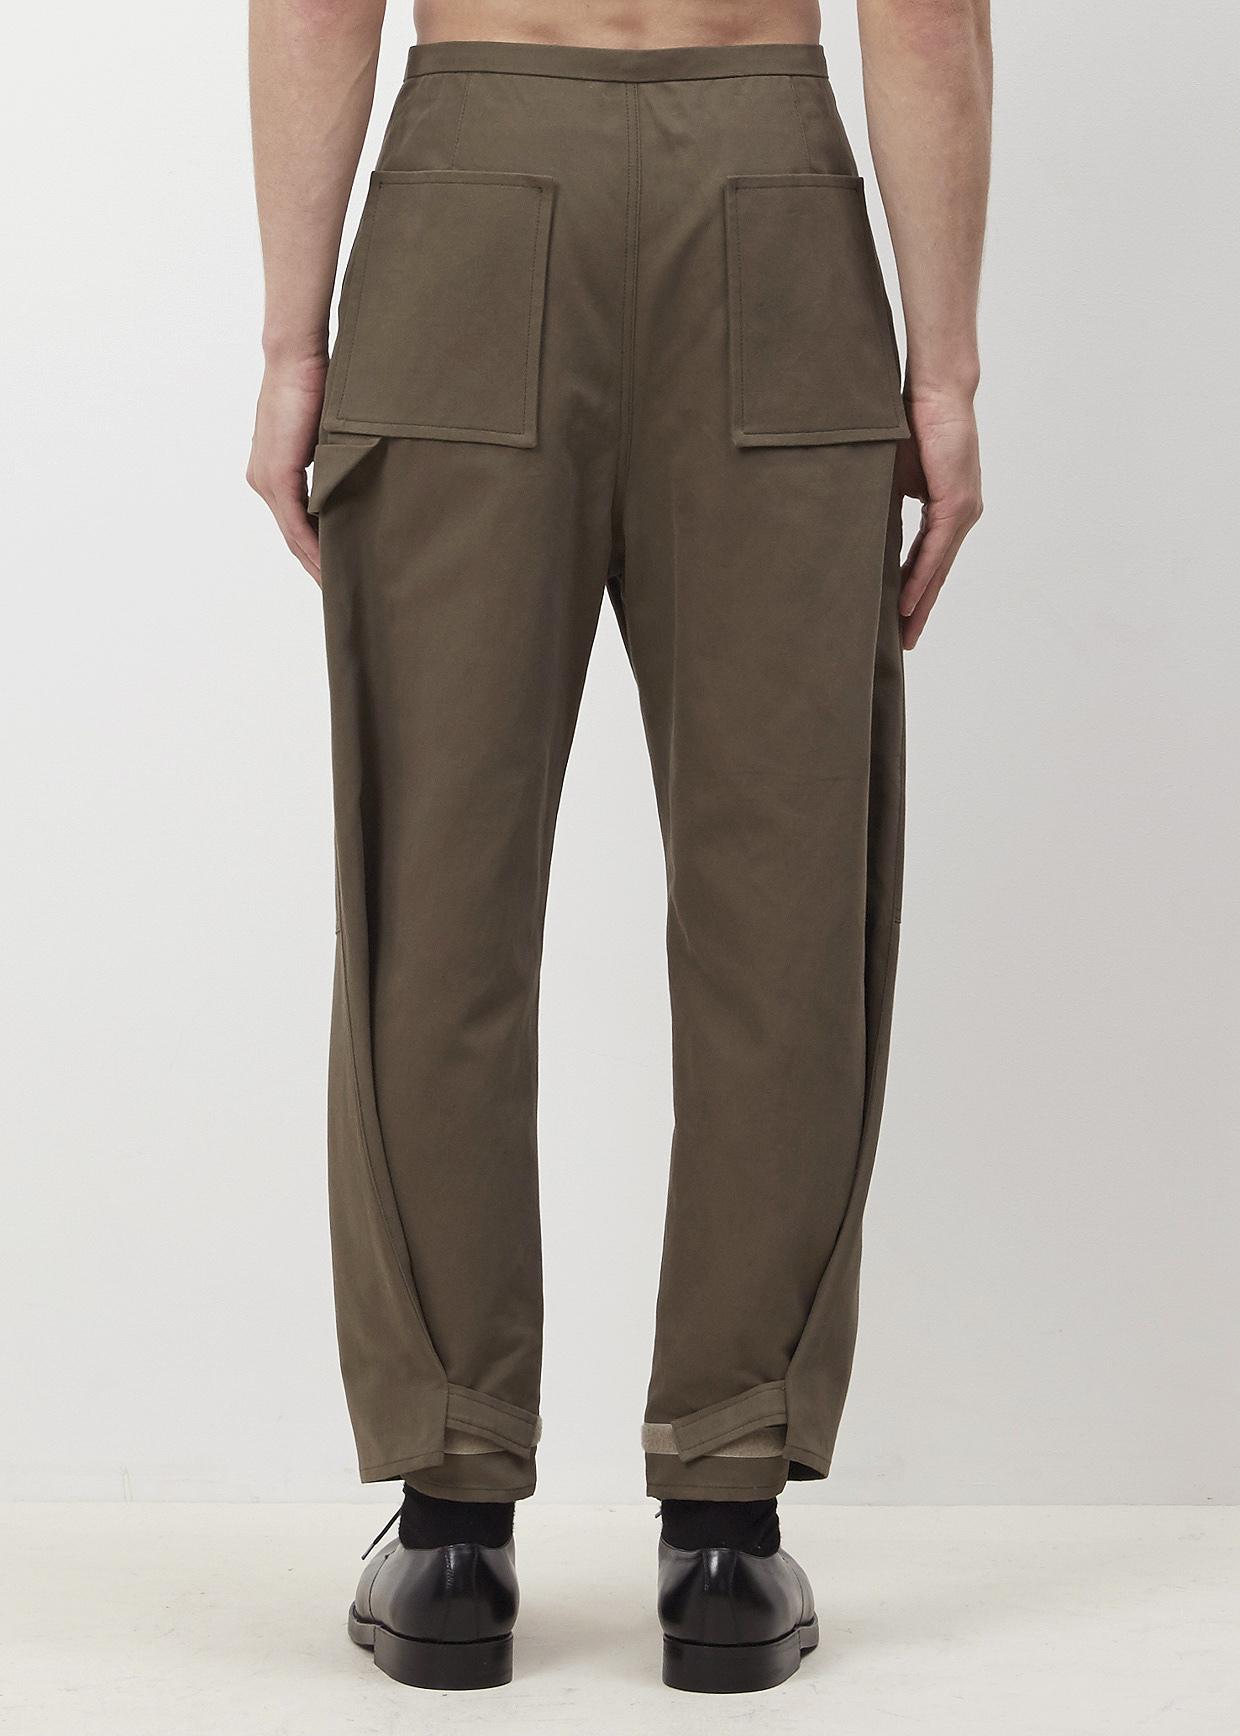 Lyst - Acne Studios Olive Green Phase Work Pants in Green for Men